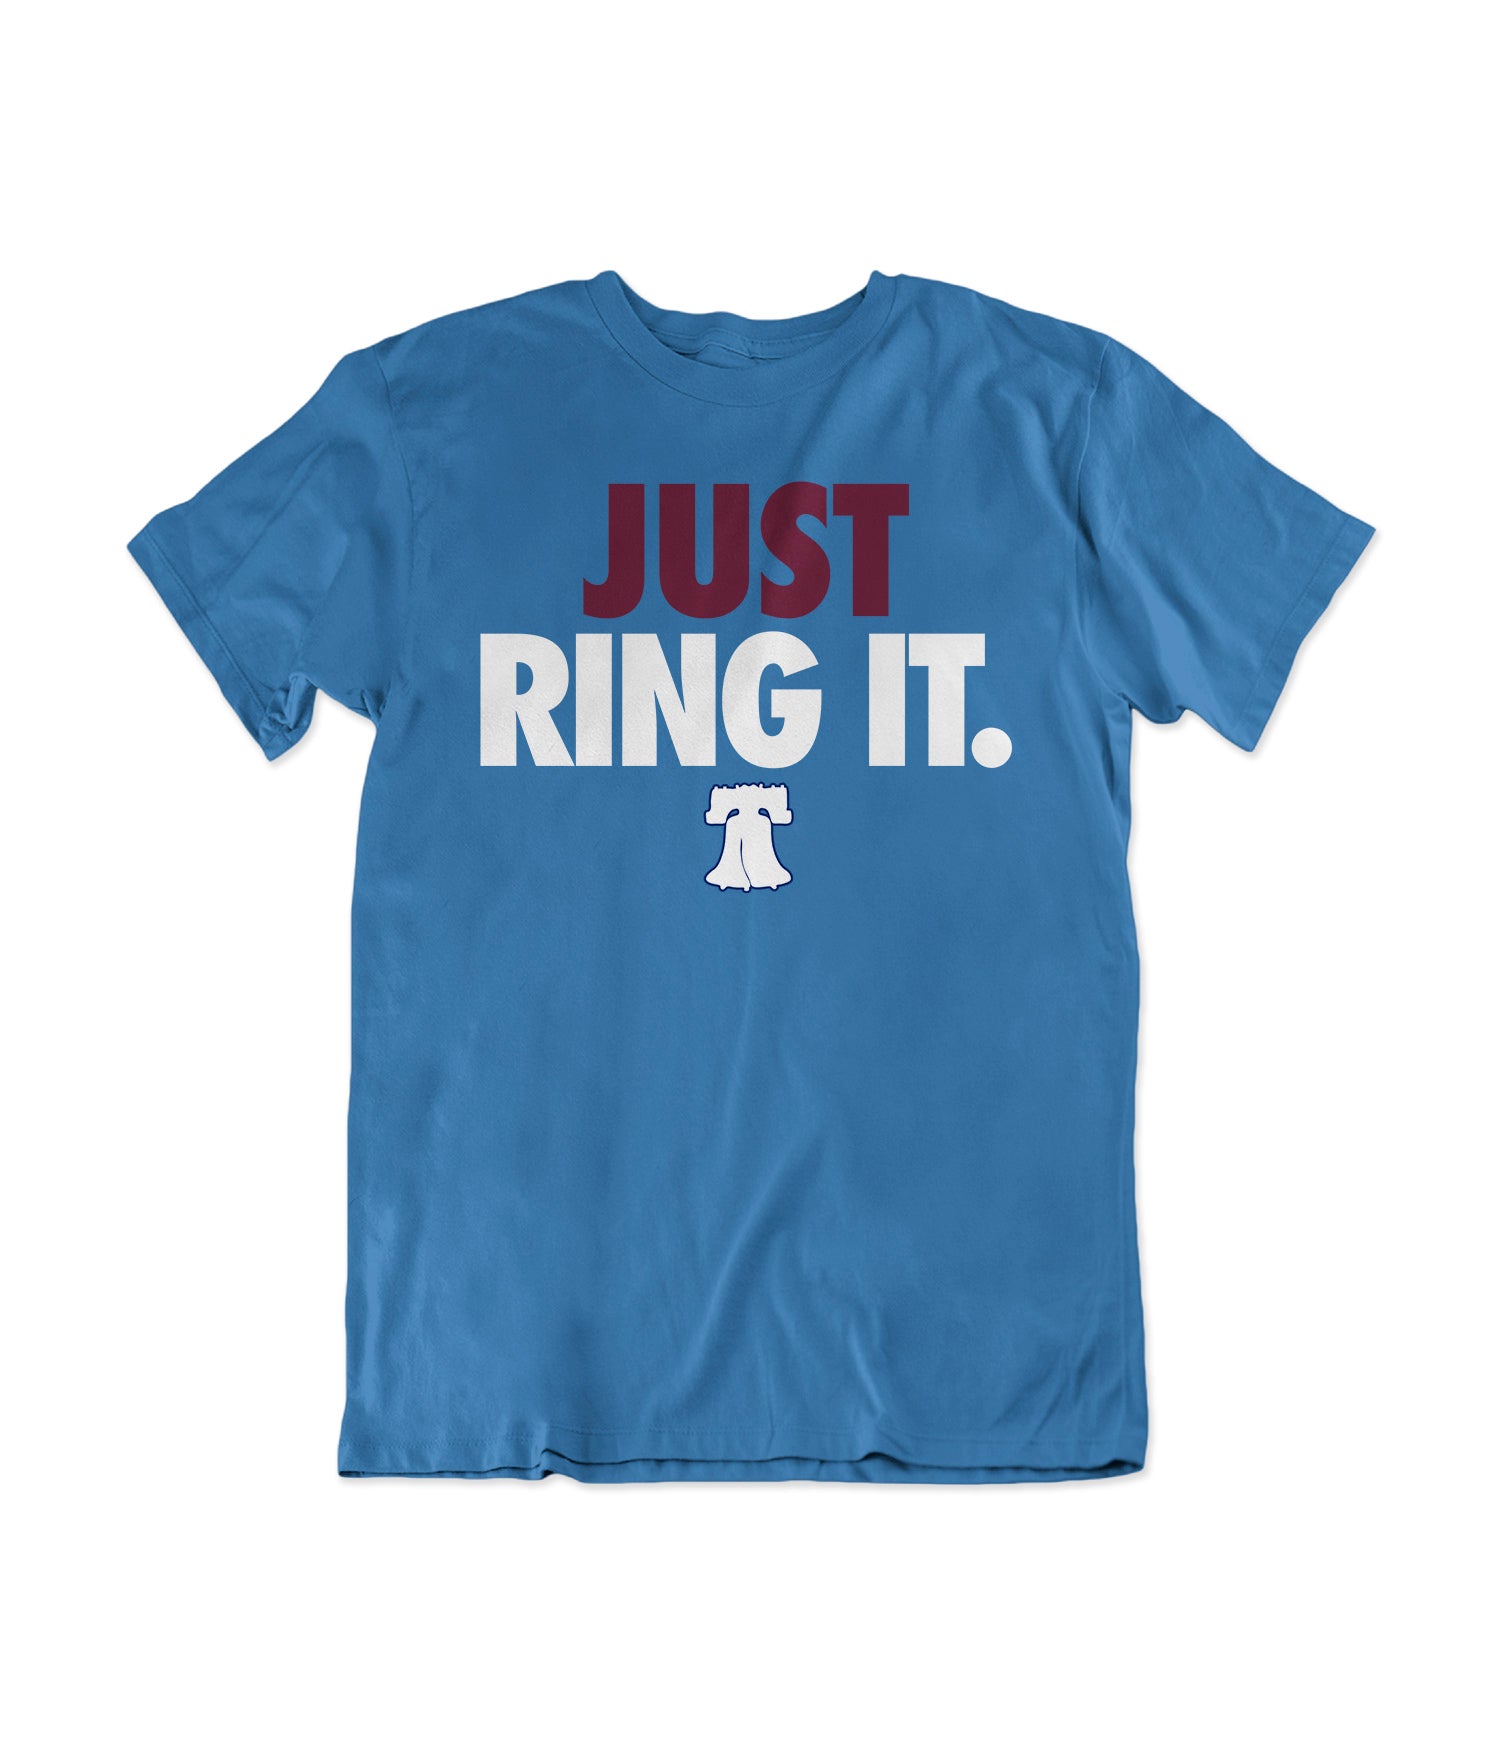 JUST RING IT.